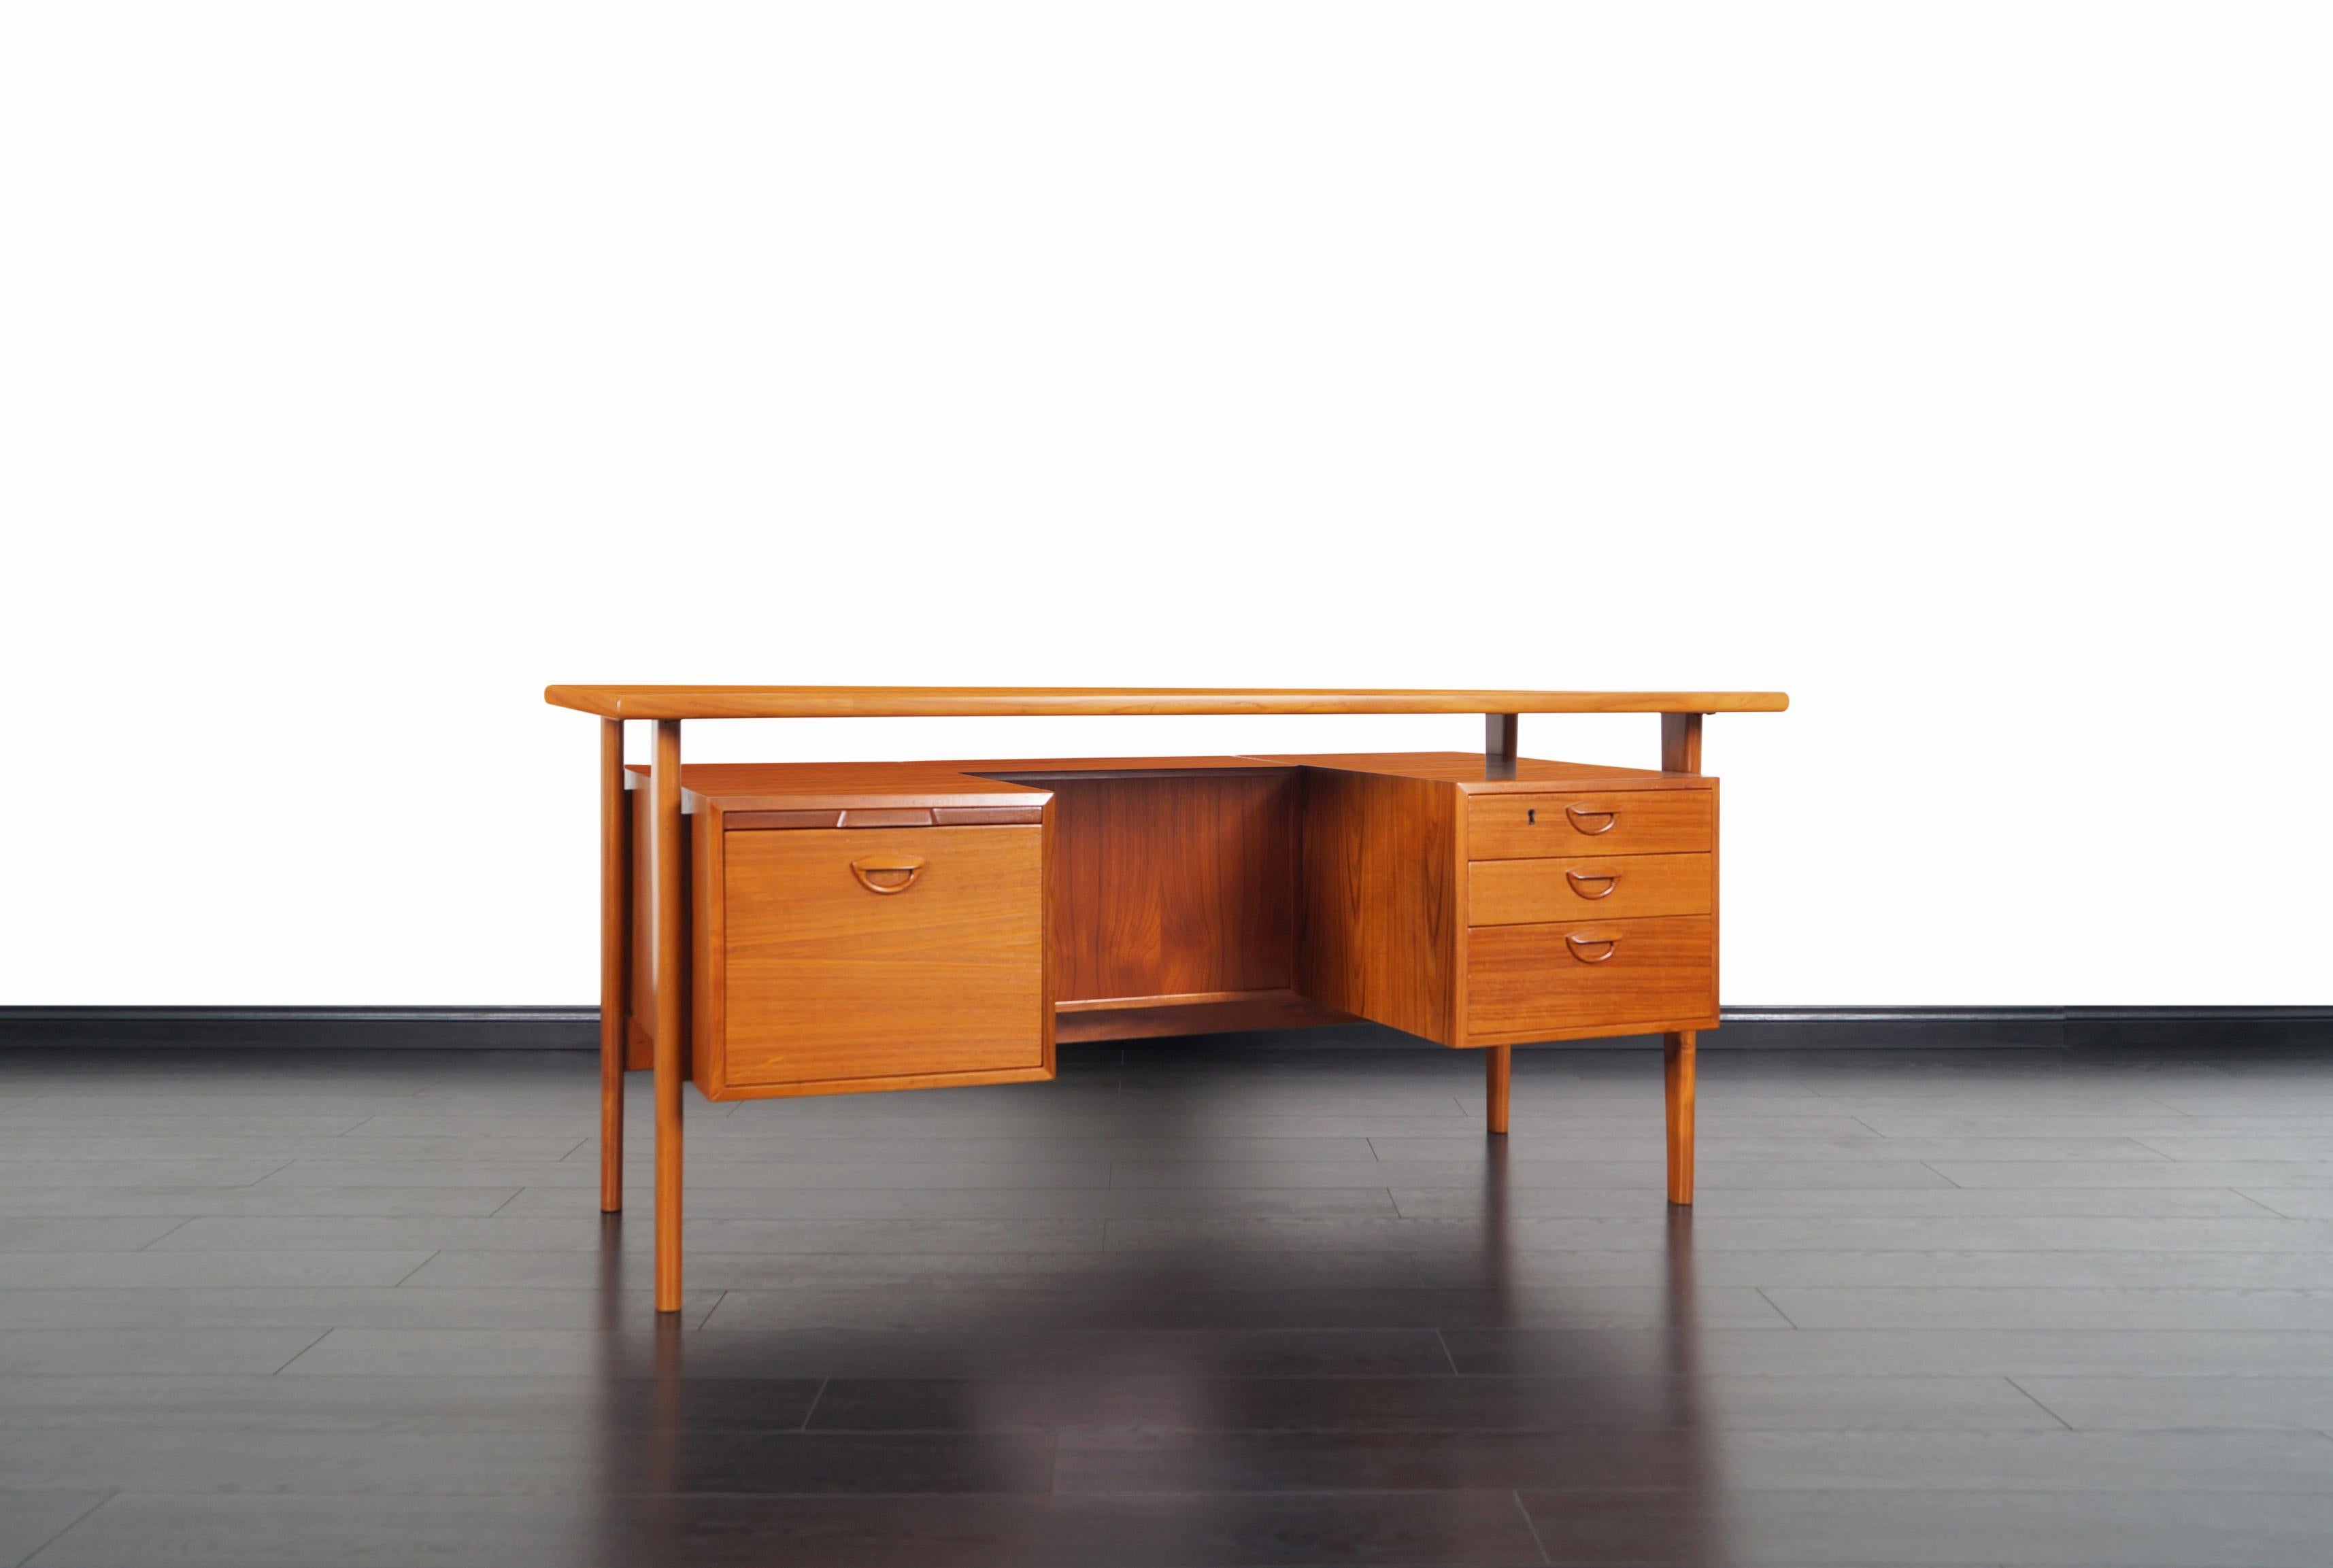 An amazing Danish executive teak desk designed by Kai Kristiansen for Feldballes Møbelfabrik, model FM60. This freestanding desk features three dovetailed drawers on the right and a file drawer with a pull-out writing surface on the left. On the